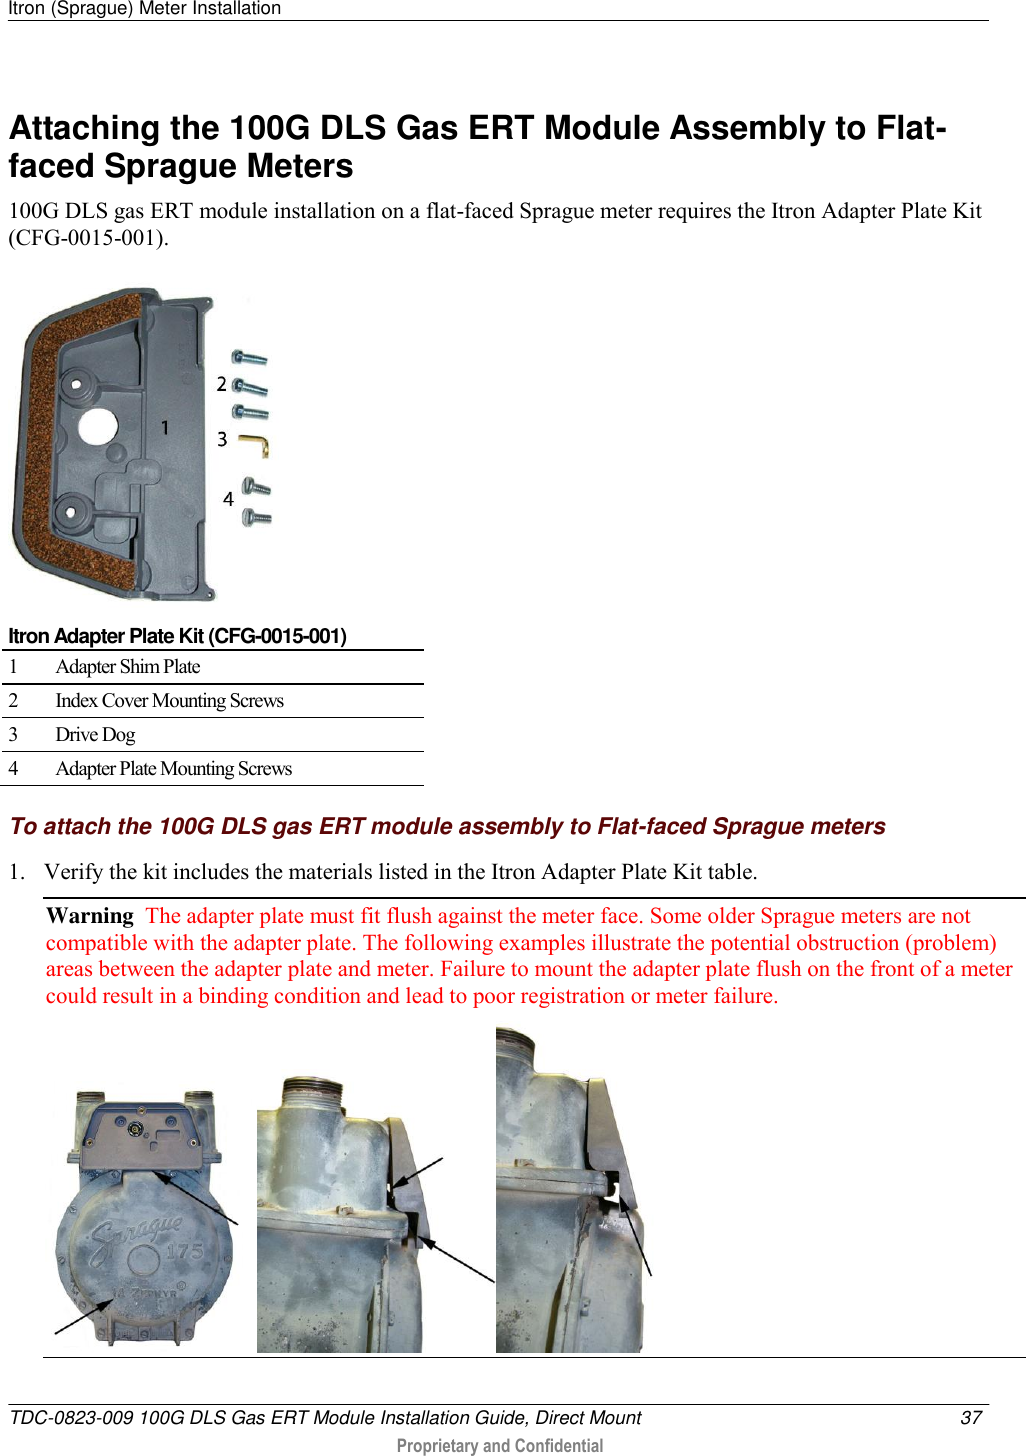 Itron (Sprague) Meter Installation   TDC-0823-009 100G DLS Gas ERT Module Installation Guide, Direct Mount  37   Proprietary and Confidential     Attaching the 100G DLS Gas ERT Module Assembly to Flat-faced Sprague Meters 100G DLS gas ERT module installation on a flat-faced Sprague meter requires the Itron Adapter Plate Kit (CFG-0015-001).   Itron Adapter Plate Kit (CFG-0015-001) 1 Adapter Shim Plate 2 Index Cover Mounting Screws 3 Drive Dog 4 Adapter Plate Mounting Screws  To attach the 100G DLS gas ERT module assembly to Flat-faced Sprague meters 1. Verify the kit includes the materials listed in the Itron Adapter Plate Kit table.  Warning  The adapter plate must fit flush against the meter face. Some older Sprague meters are not compatible with the adapter plate. The following examples illustrate the potential obstruction (problem) areas between the adapter plate and meter. Failure to mount the adapter plate flush on the front of a meter could result in a binding condition and lead to poor registration or meter failure.  